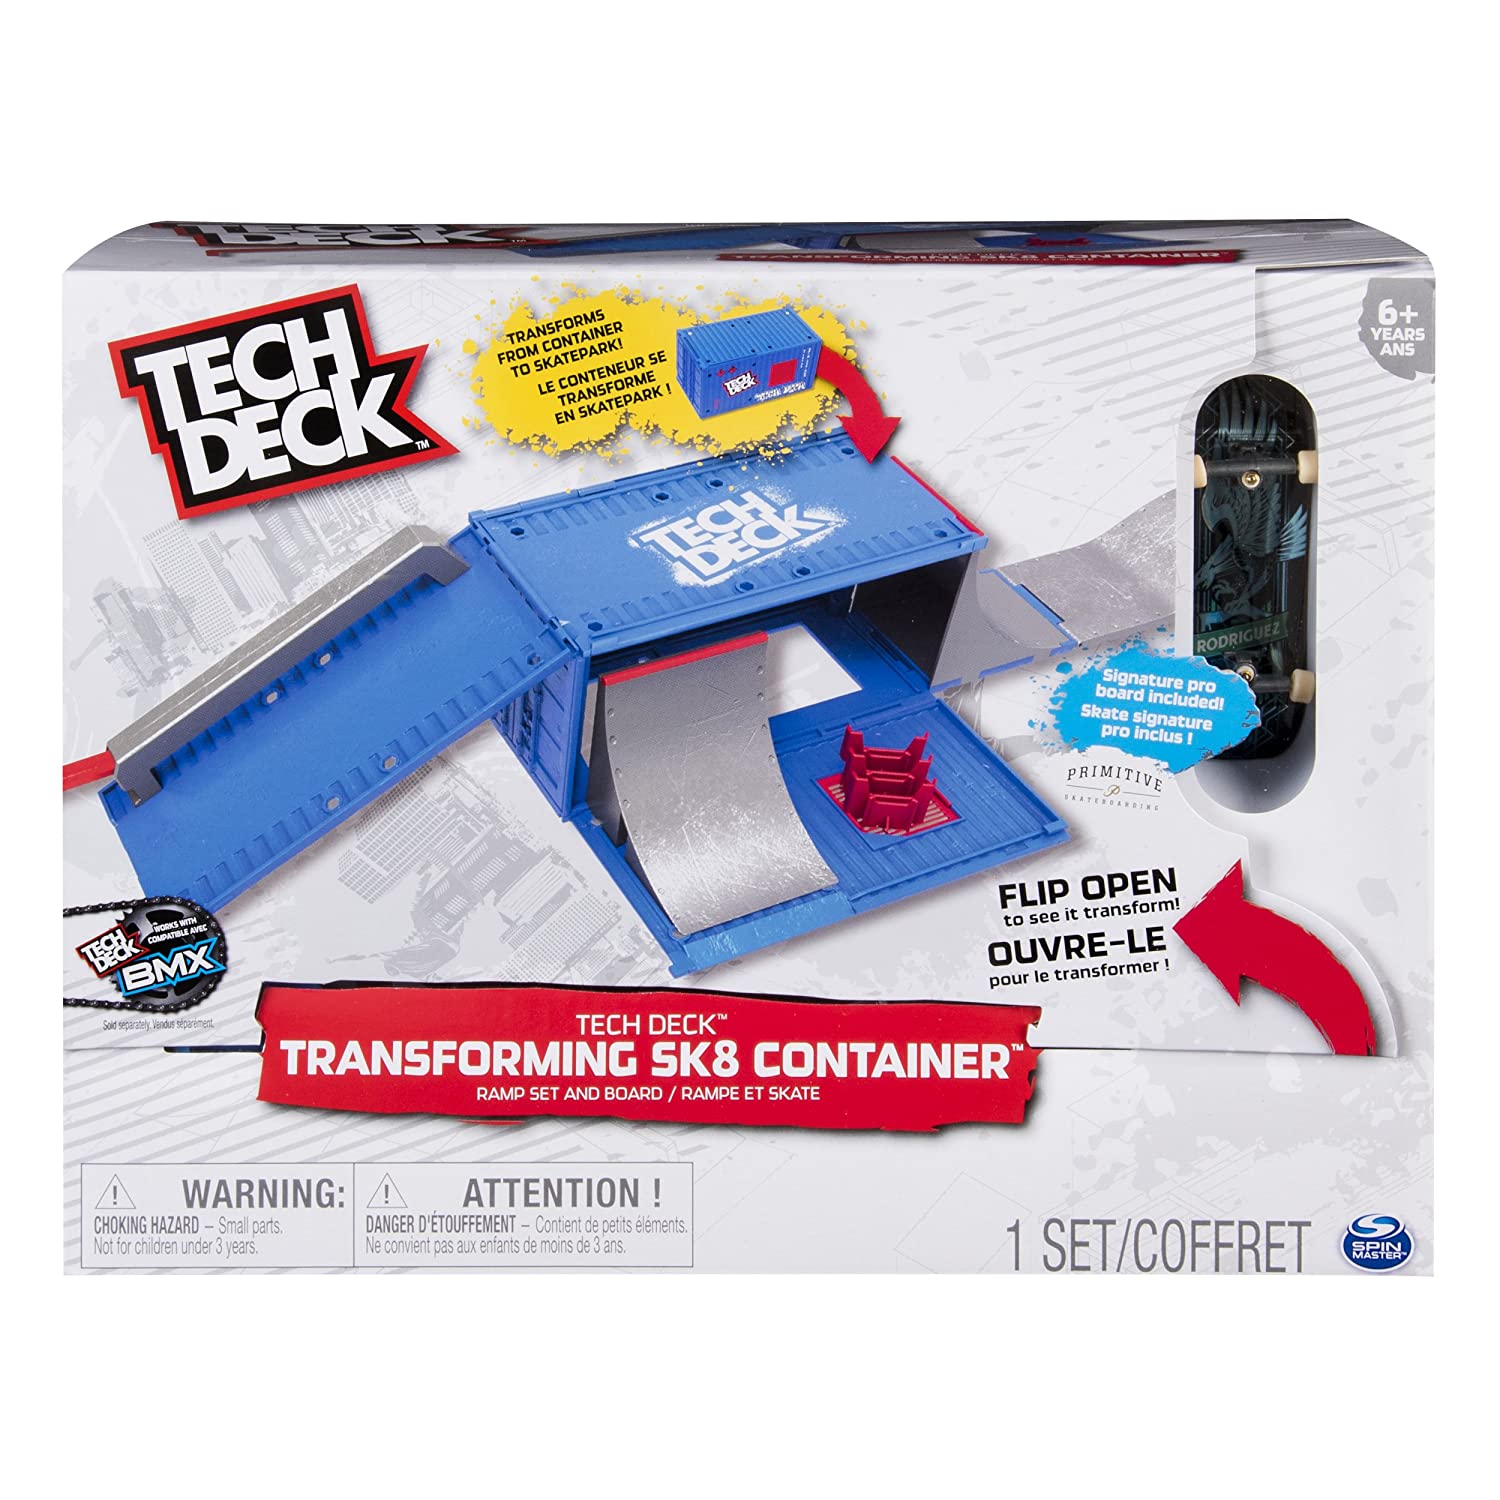 TECH DECK - Transforming SK8 Container with Ramp Set and Skateboard